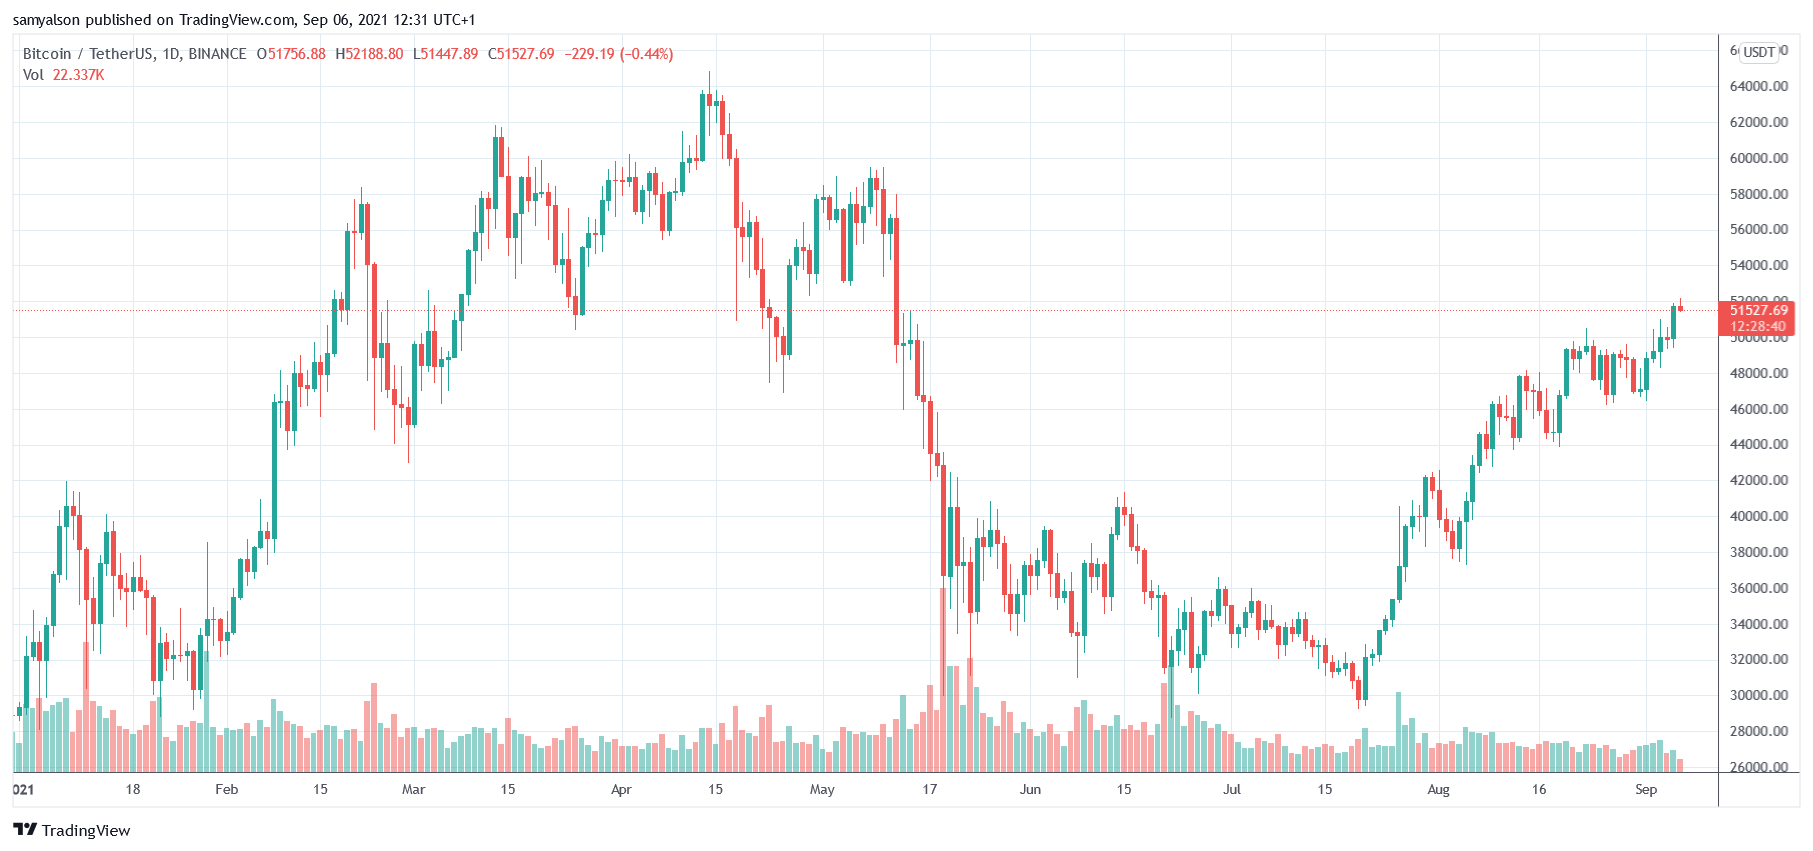 Bitcoin daily chart YTD with volume